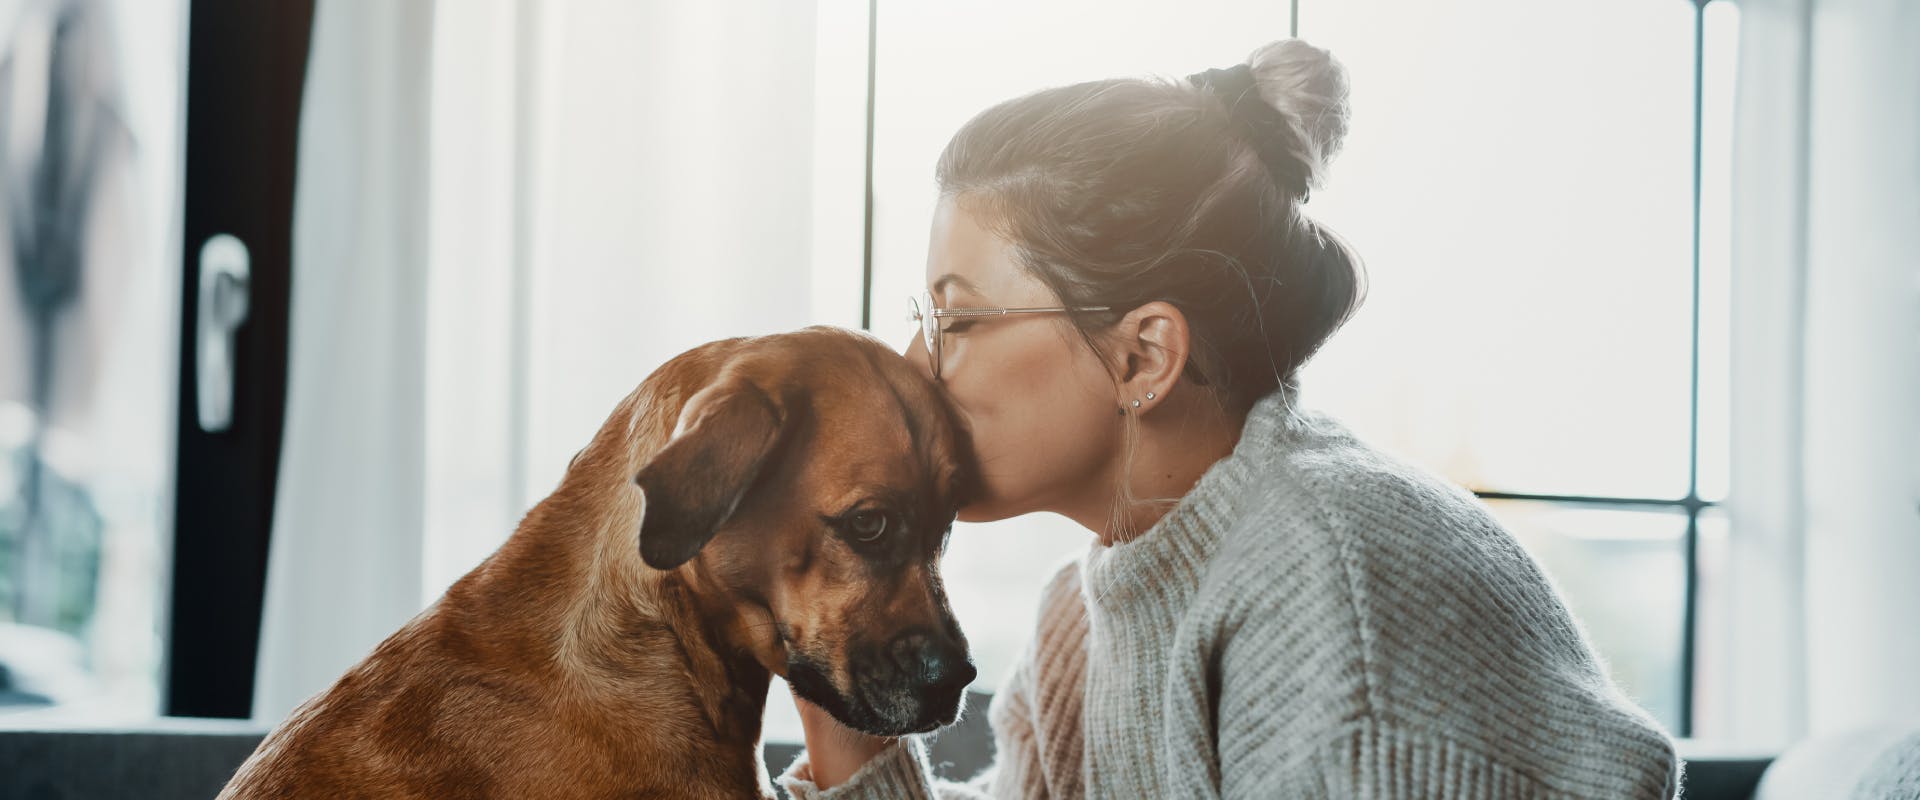 a woman with glasses on a hair tied up kissing the top of the head on a large brown dog